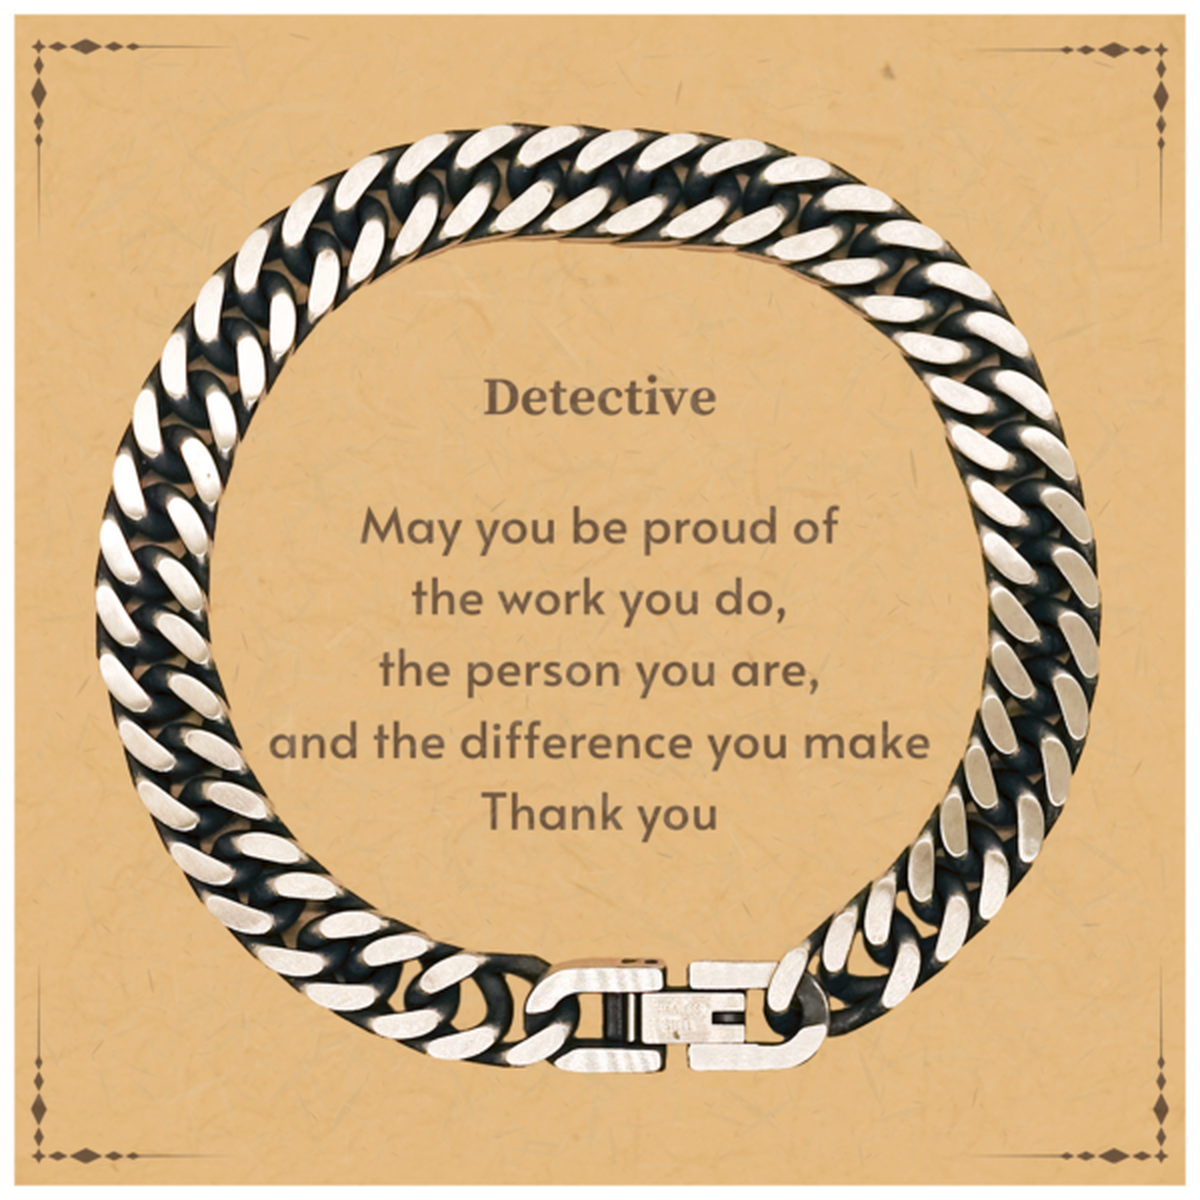 Heartwarming Cuban Link Chain Bracelet Retirement Coworkers Gifts for Detective, Detective May You be proud of the work you do, the person you are Gifts for Boss Men Women Friends